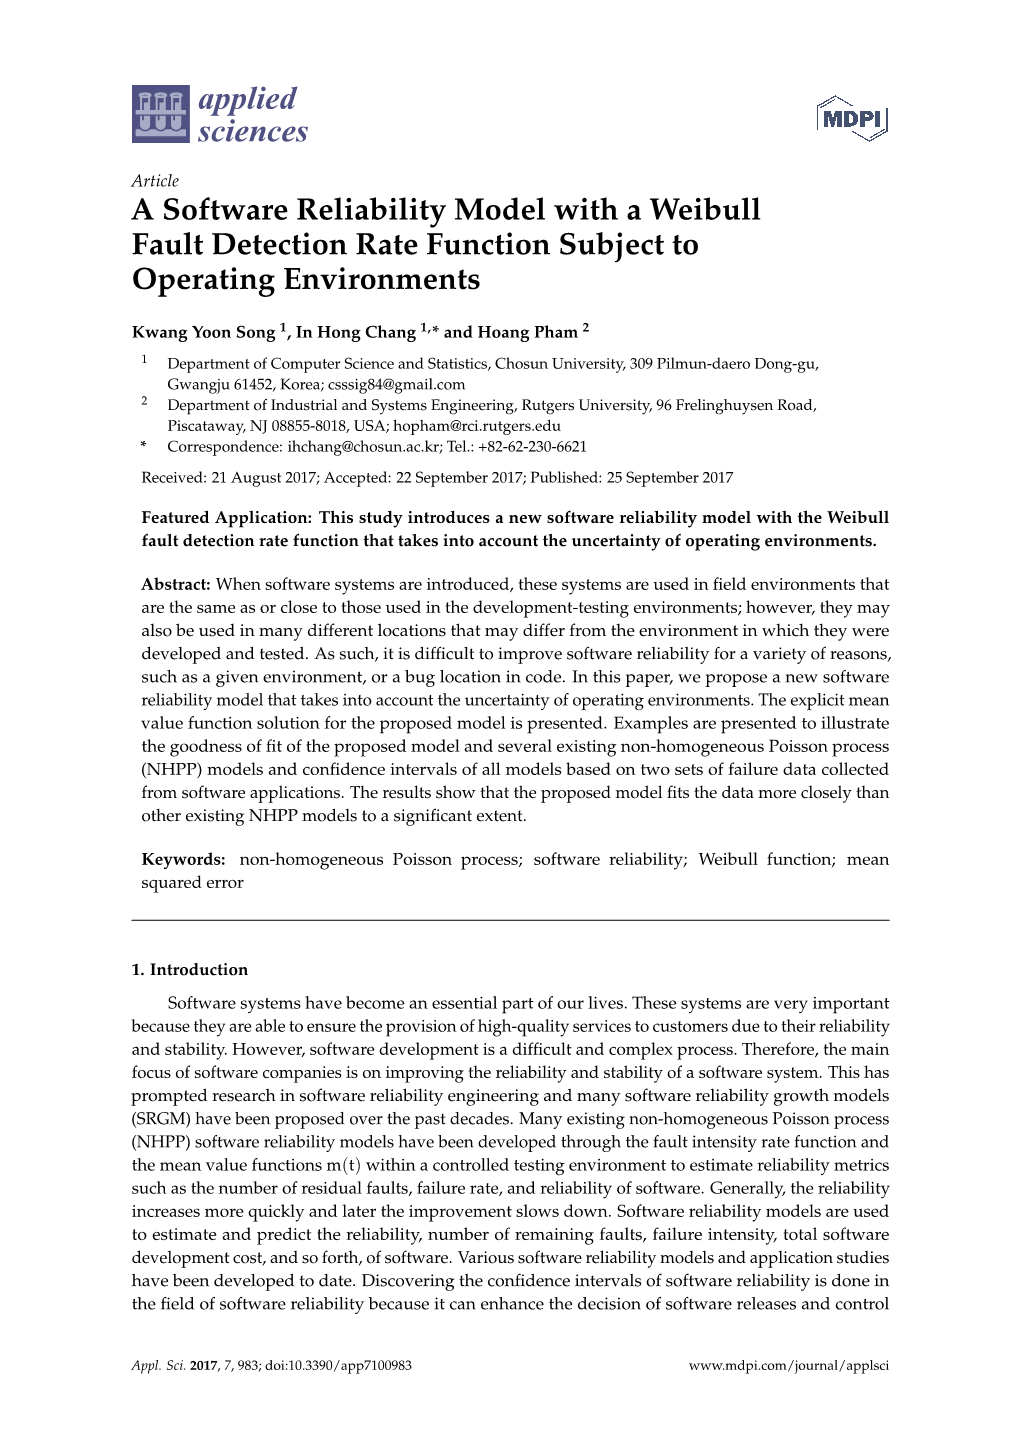 A Software Reliability Model with a Weibull Fault Detection Rate Function Subject to Operating Environments